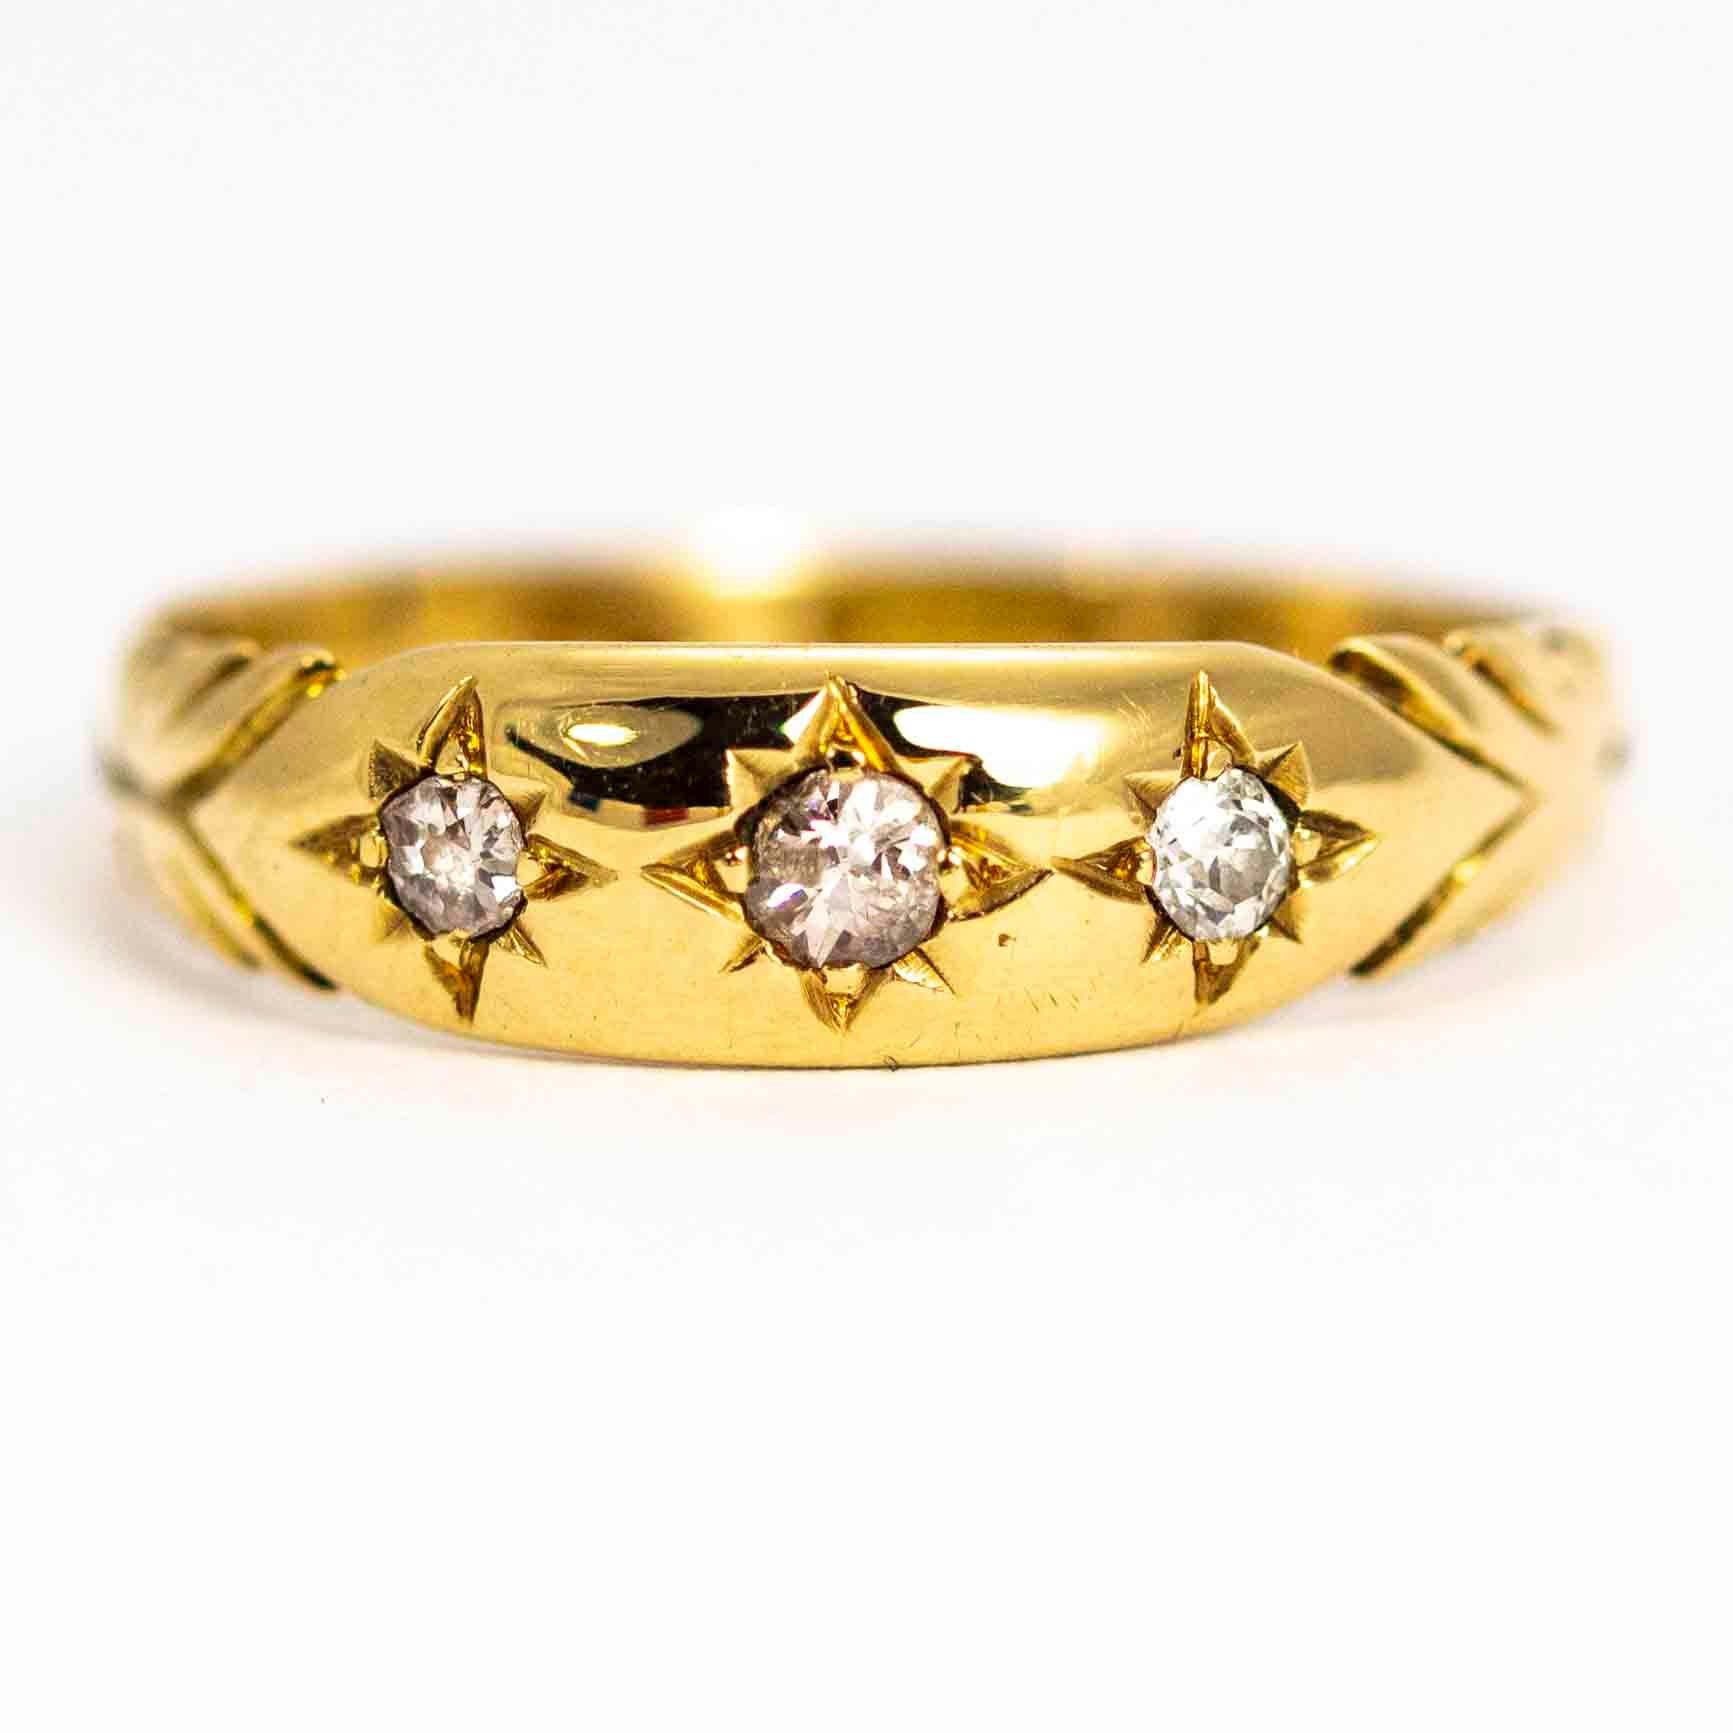 A wonderful vintage gypsy three-stone ring set with 18 points of beautiful white round cut diamonds. The stones sit between fine detailed shoulders. Modelled in 18 carat yellow gold. Fully hallmarked 1965 Chester, England.

Ring Size: UK K 1/2, US 6